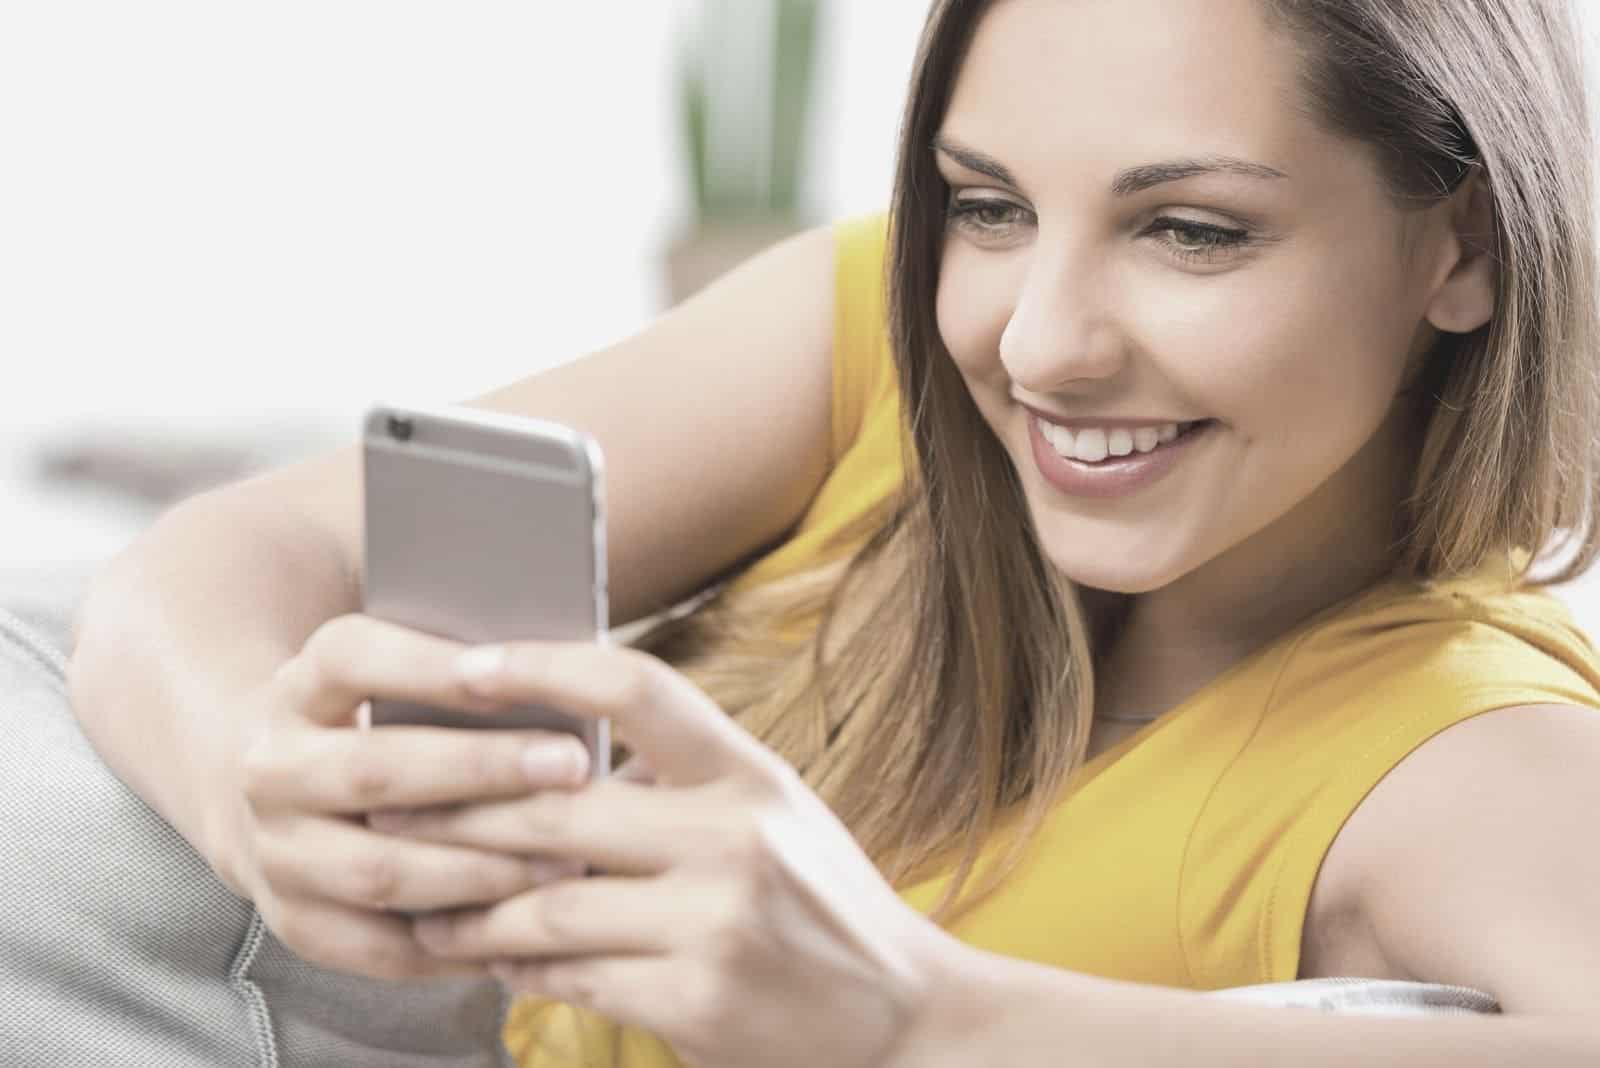 happy woman texting and smiling while lounging in a couch